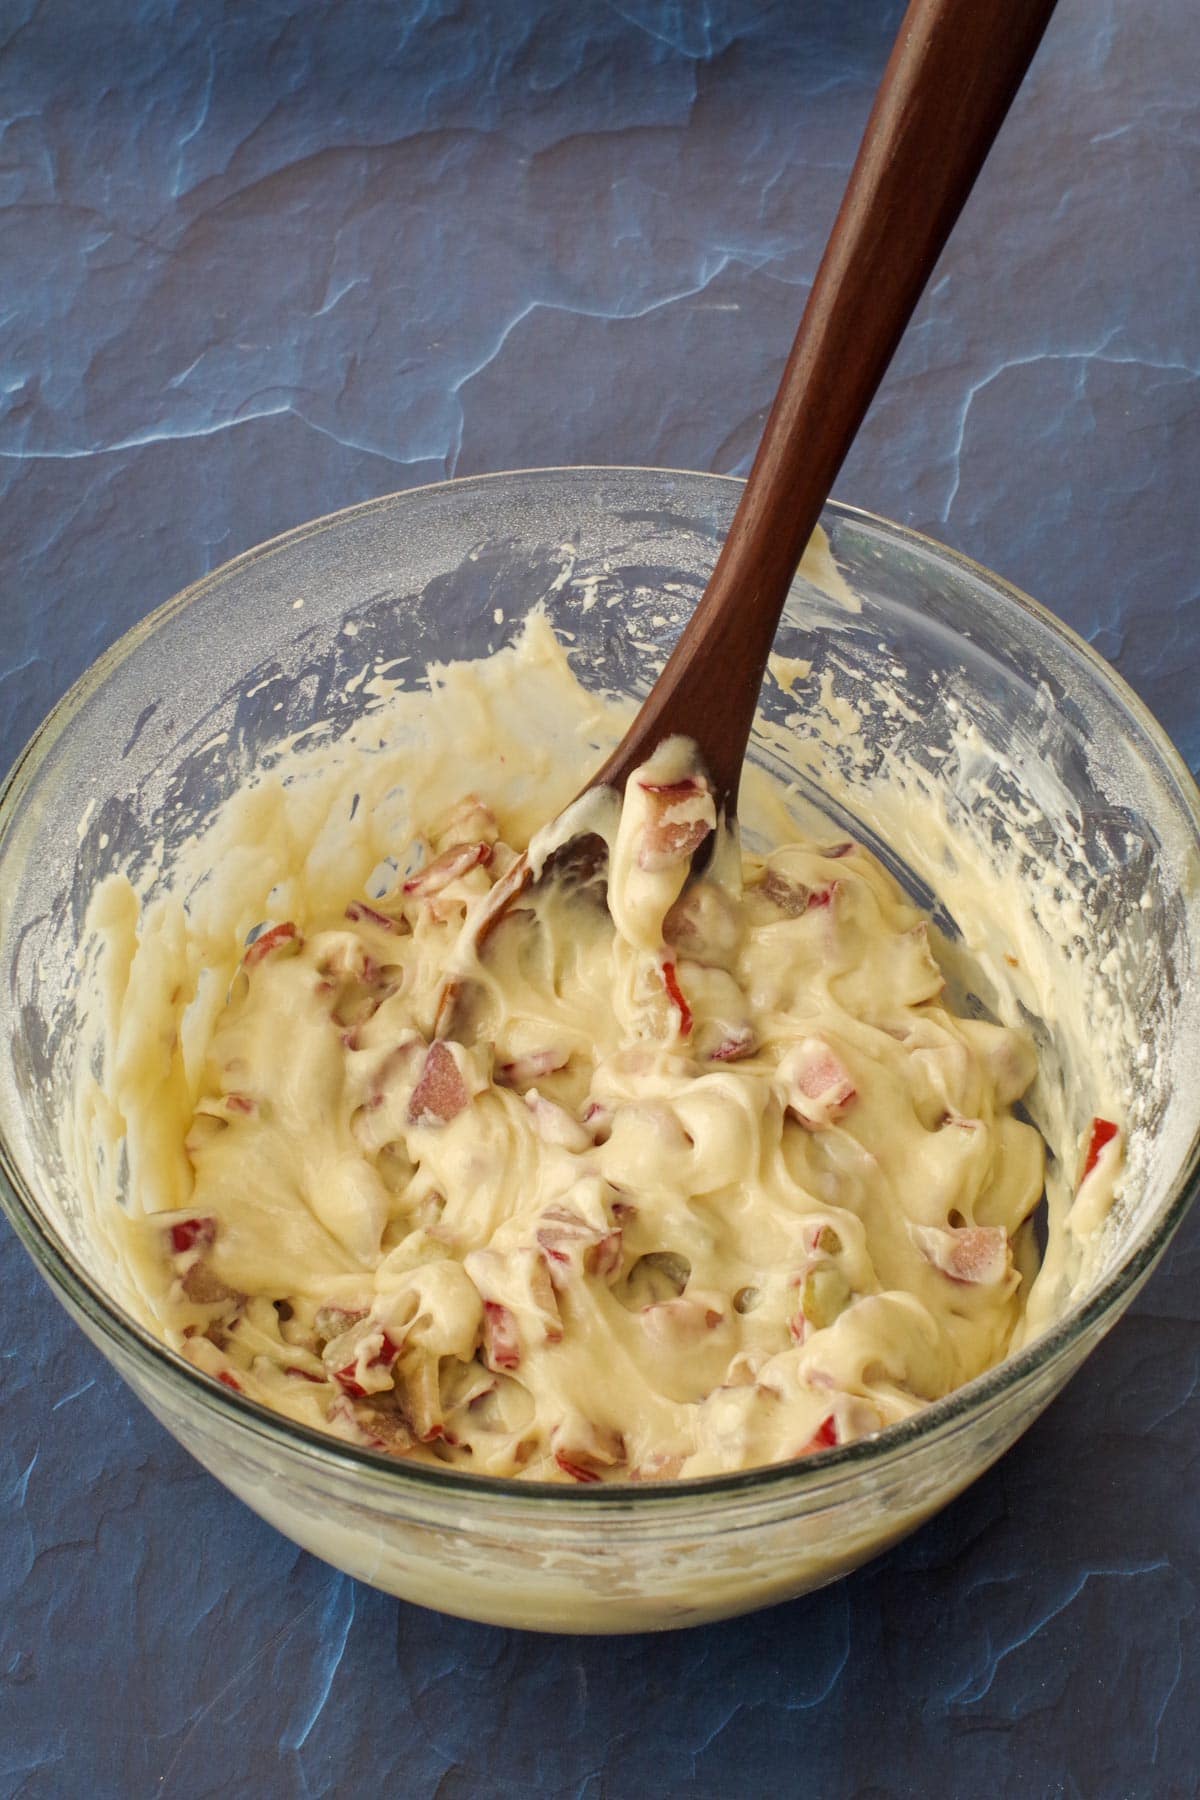 rhubarb folded into cake batter, with dark wooden spoon